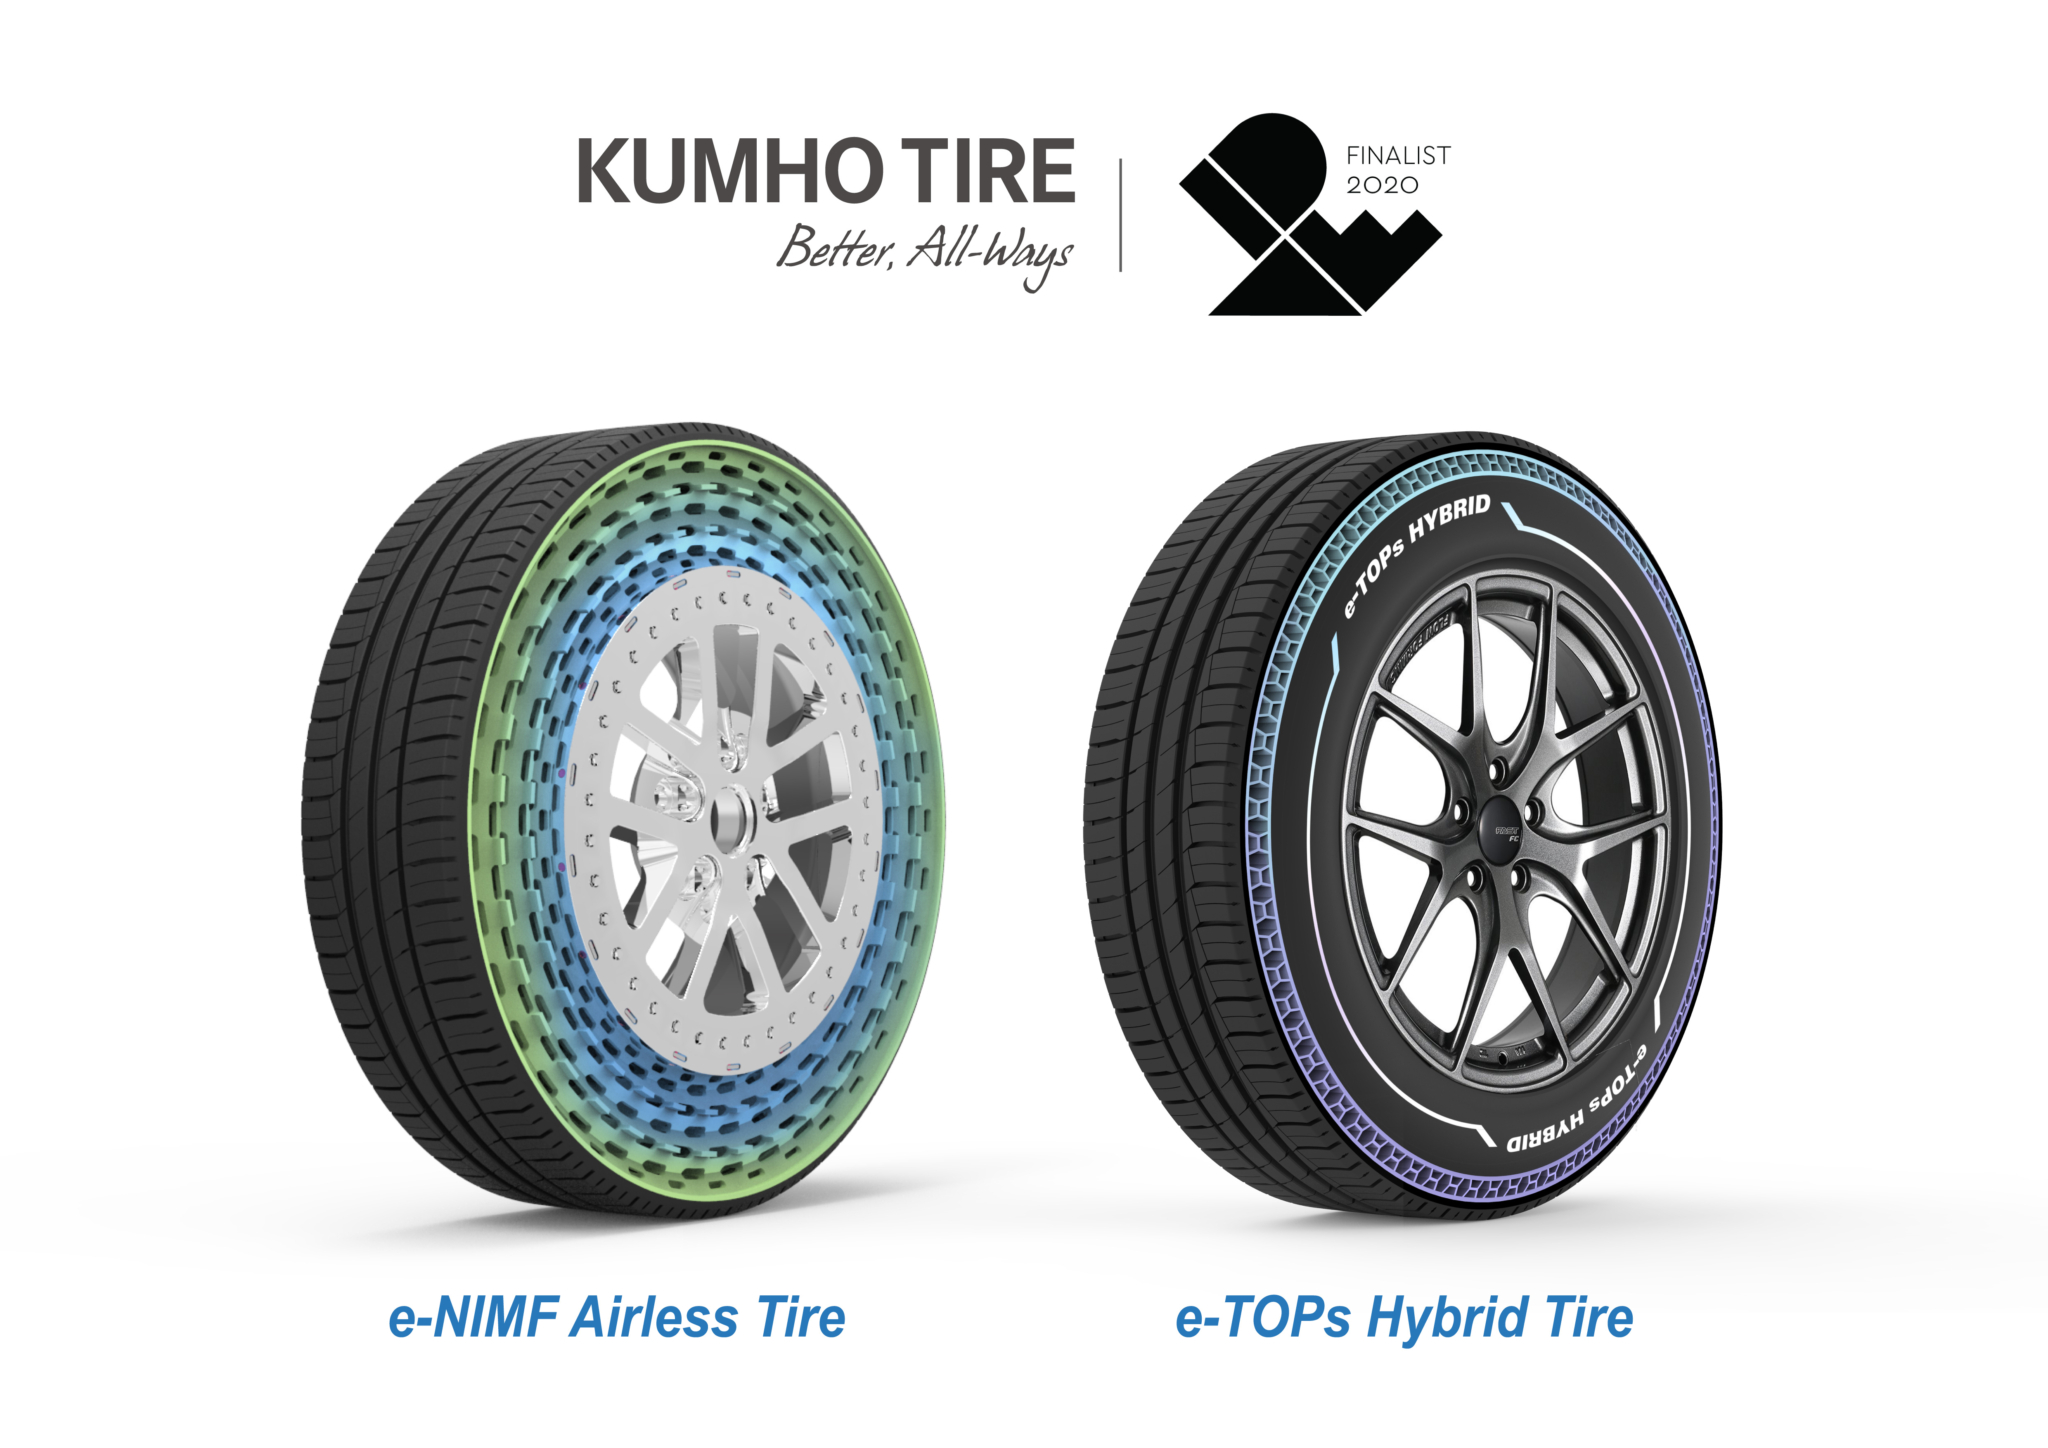 Kumho wins Idea design awards for airless and hybrid tyres